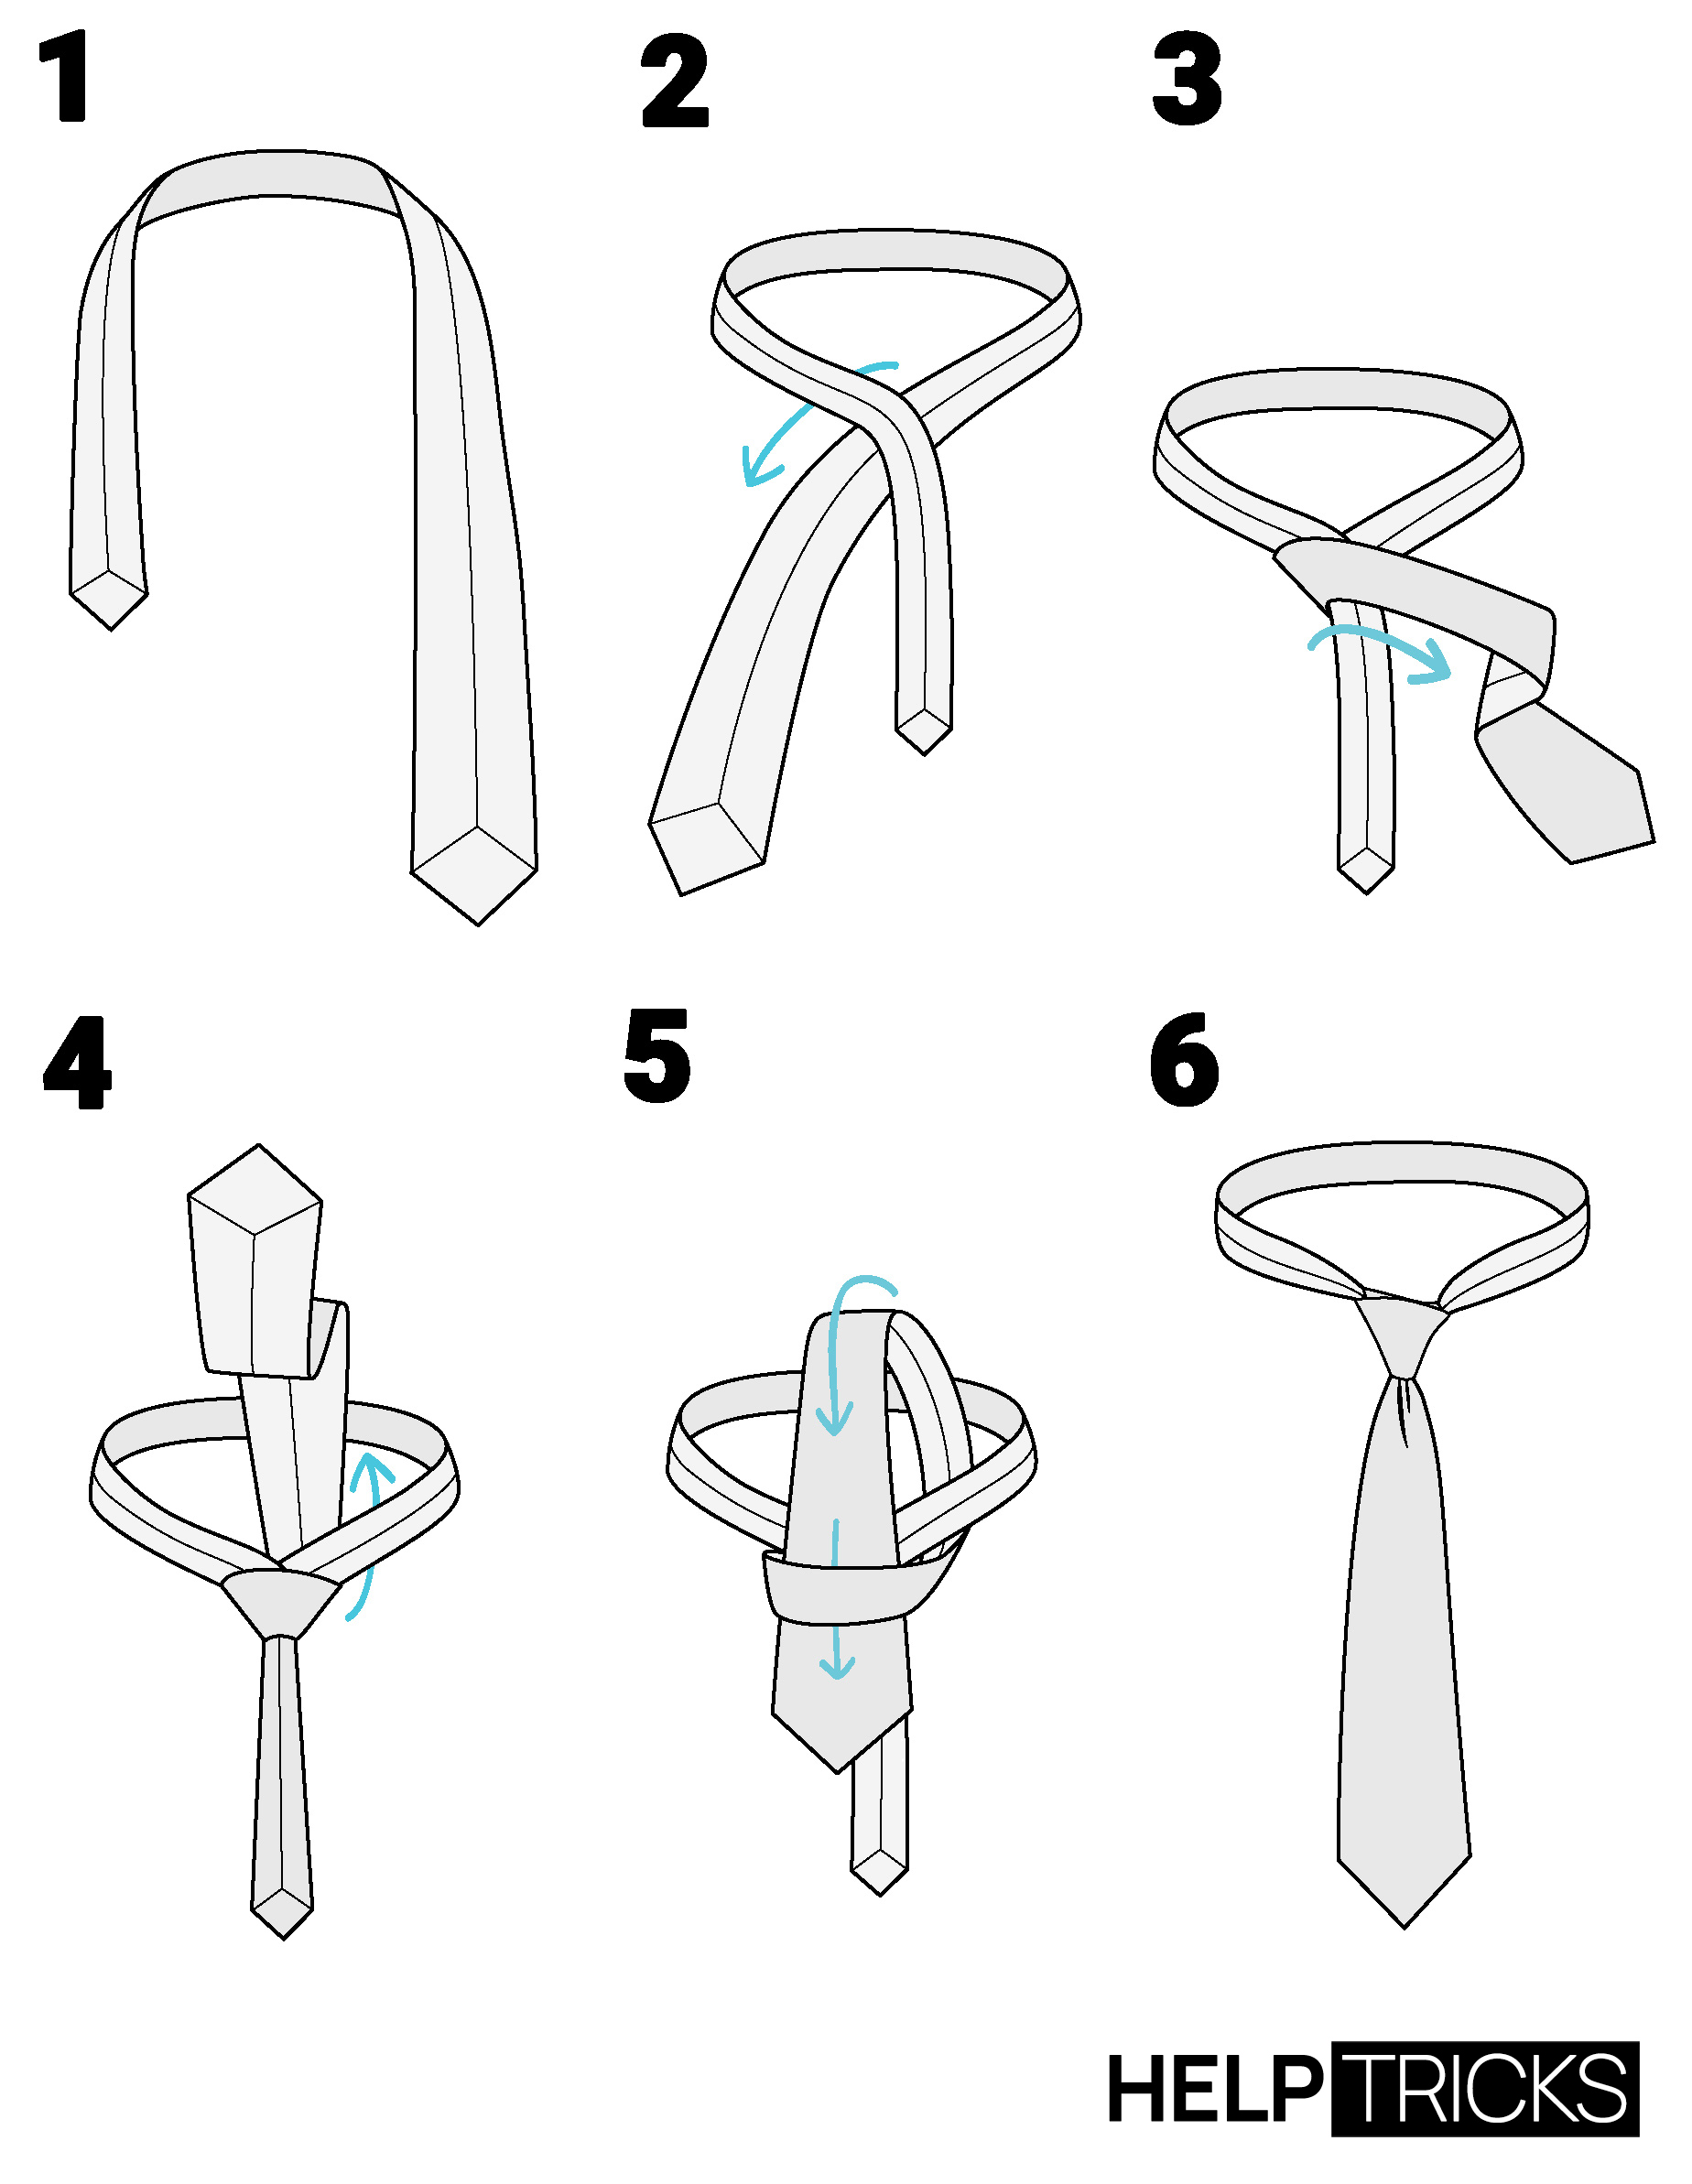 How to tie a Tie - The Simple Knot (Oriental Knot)